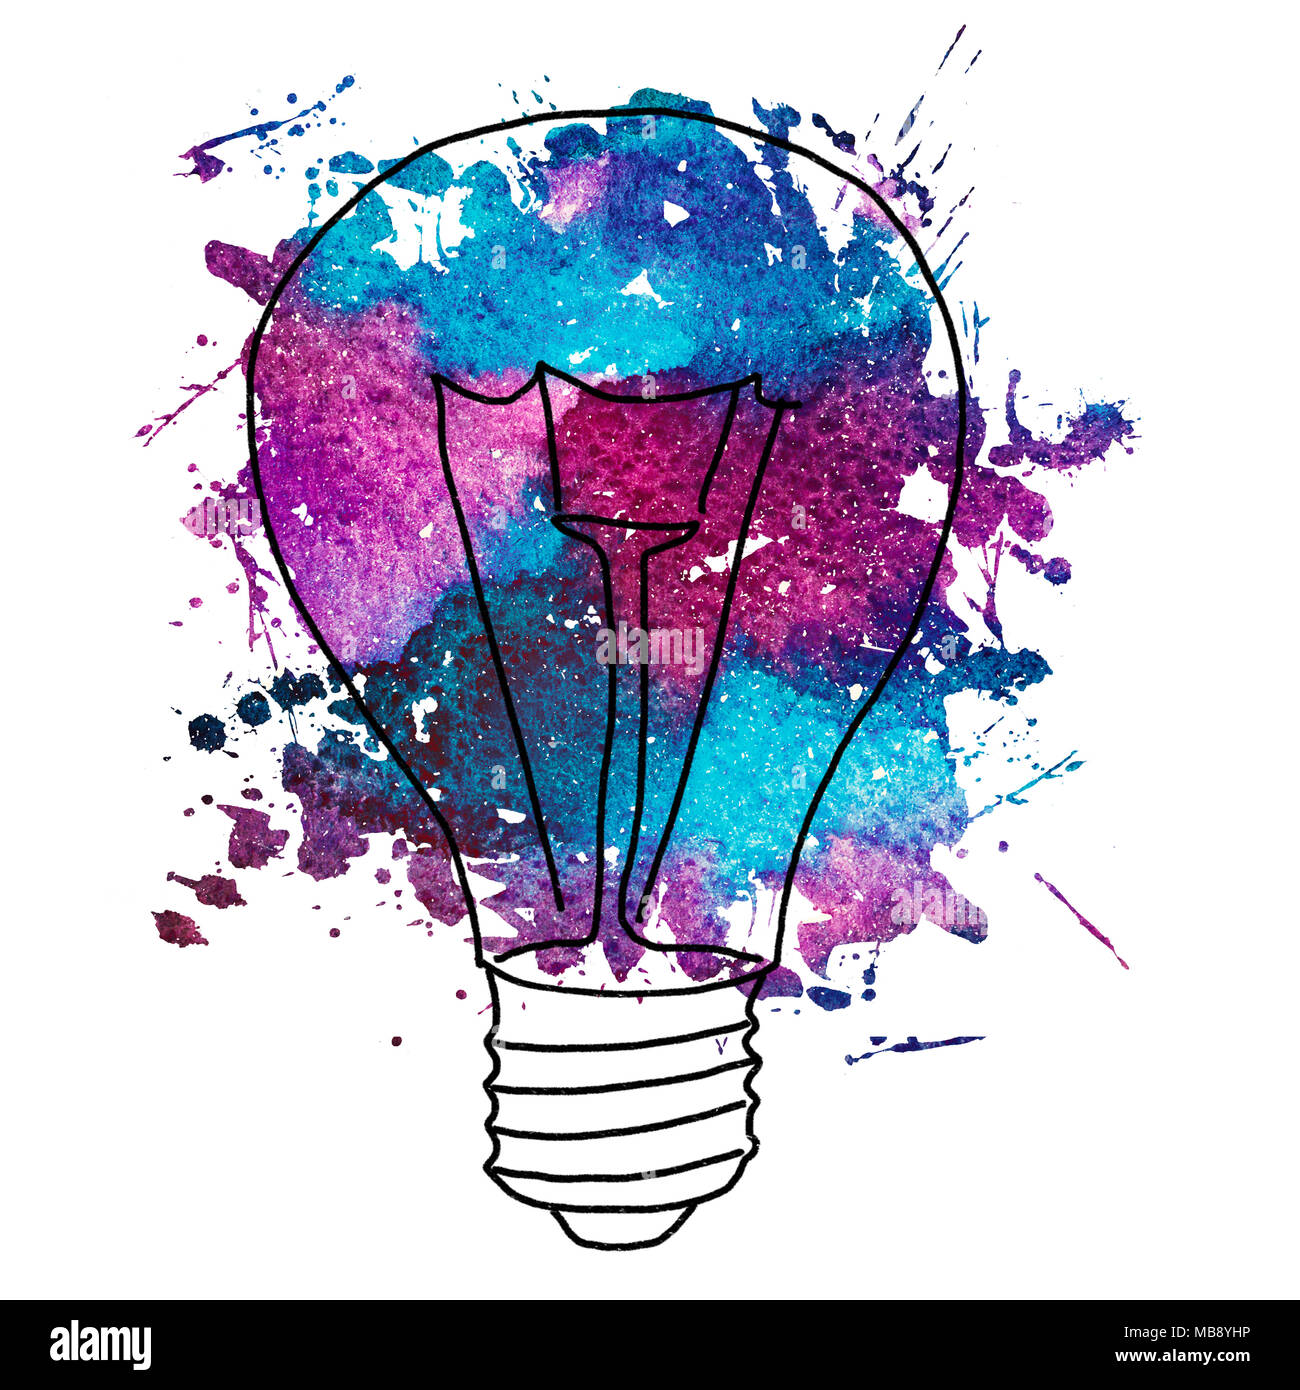 2d hand drawn illustration of edison's bulb. Colorful isolated splash watercolor. Ink sketch, doodle on white background. Idea and solution concept. Stock Photo